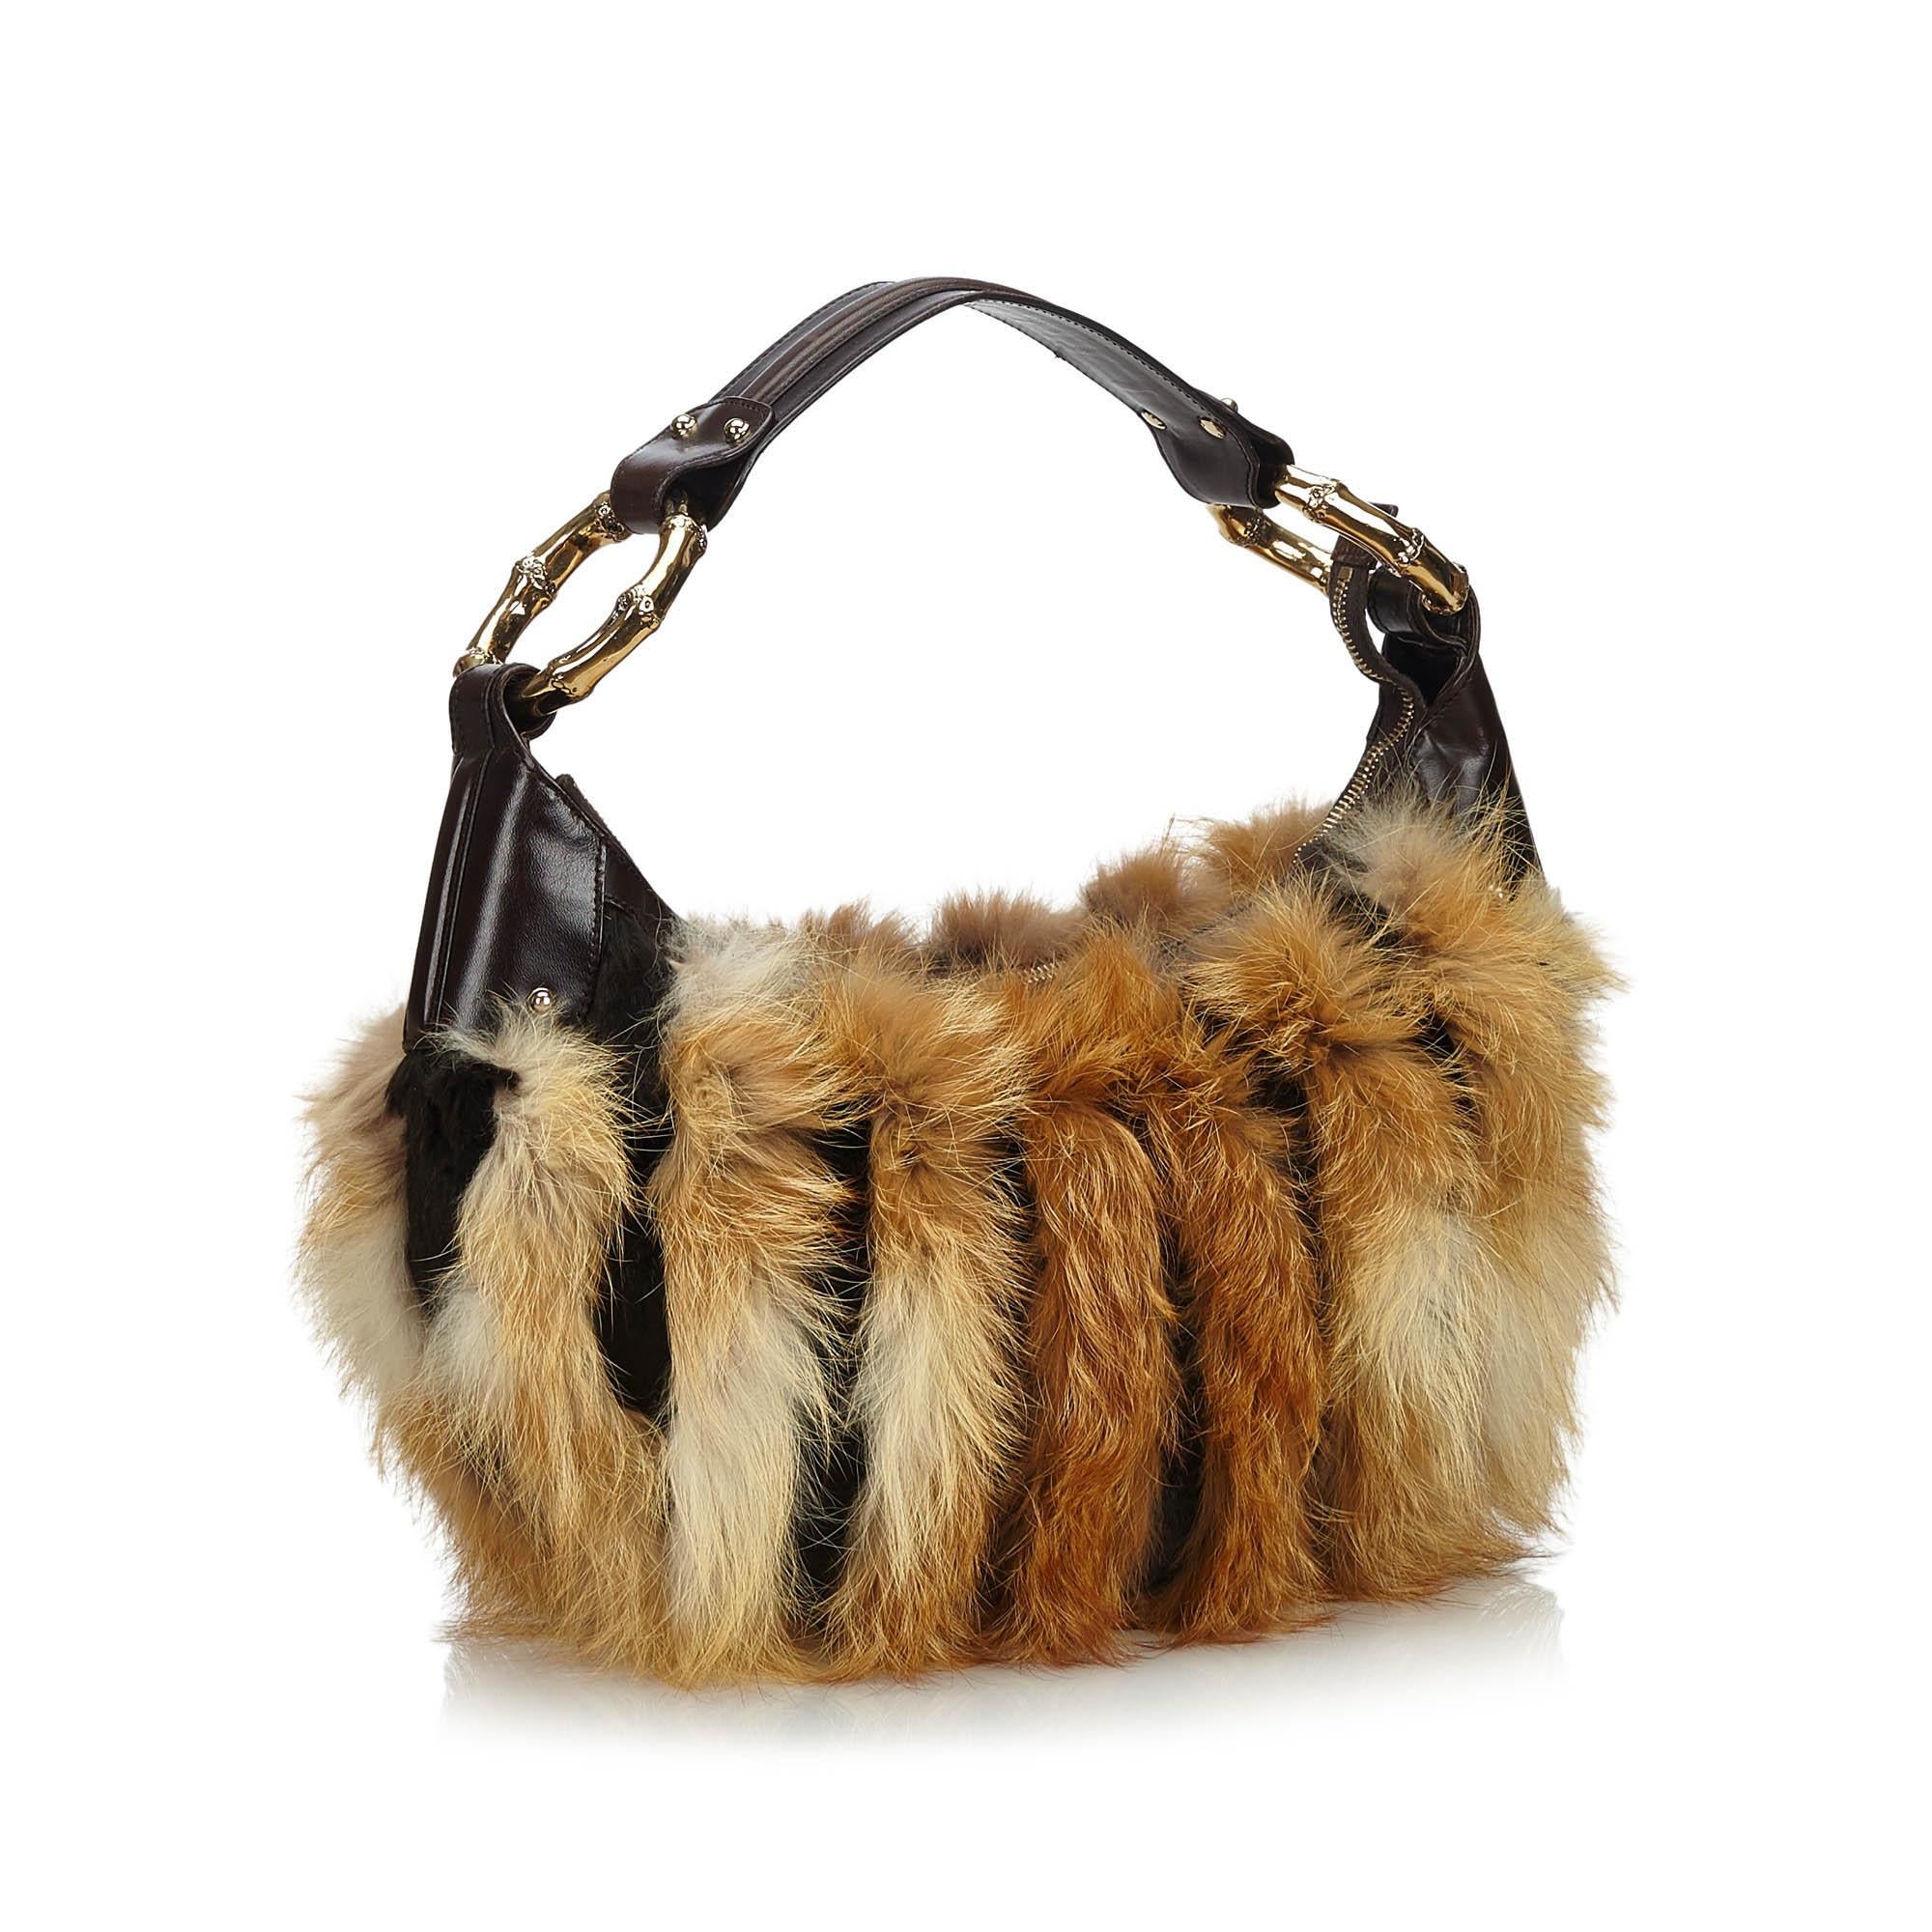 This hobo bag features a leather body with fur trim, a flat leather strap with bamboo detail, a top zip closure, and an interior zip pocket. It carries as AB condition rating.

Inclusions: 
Dust Bag

Dimensions:
Length: 24.00 cm
Width: 25.00